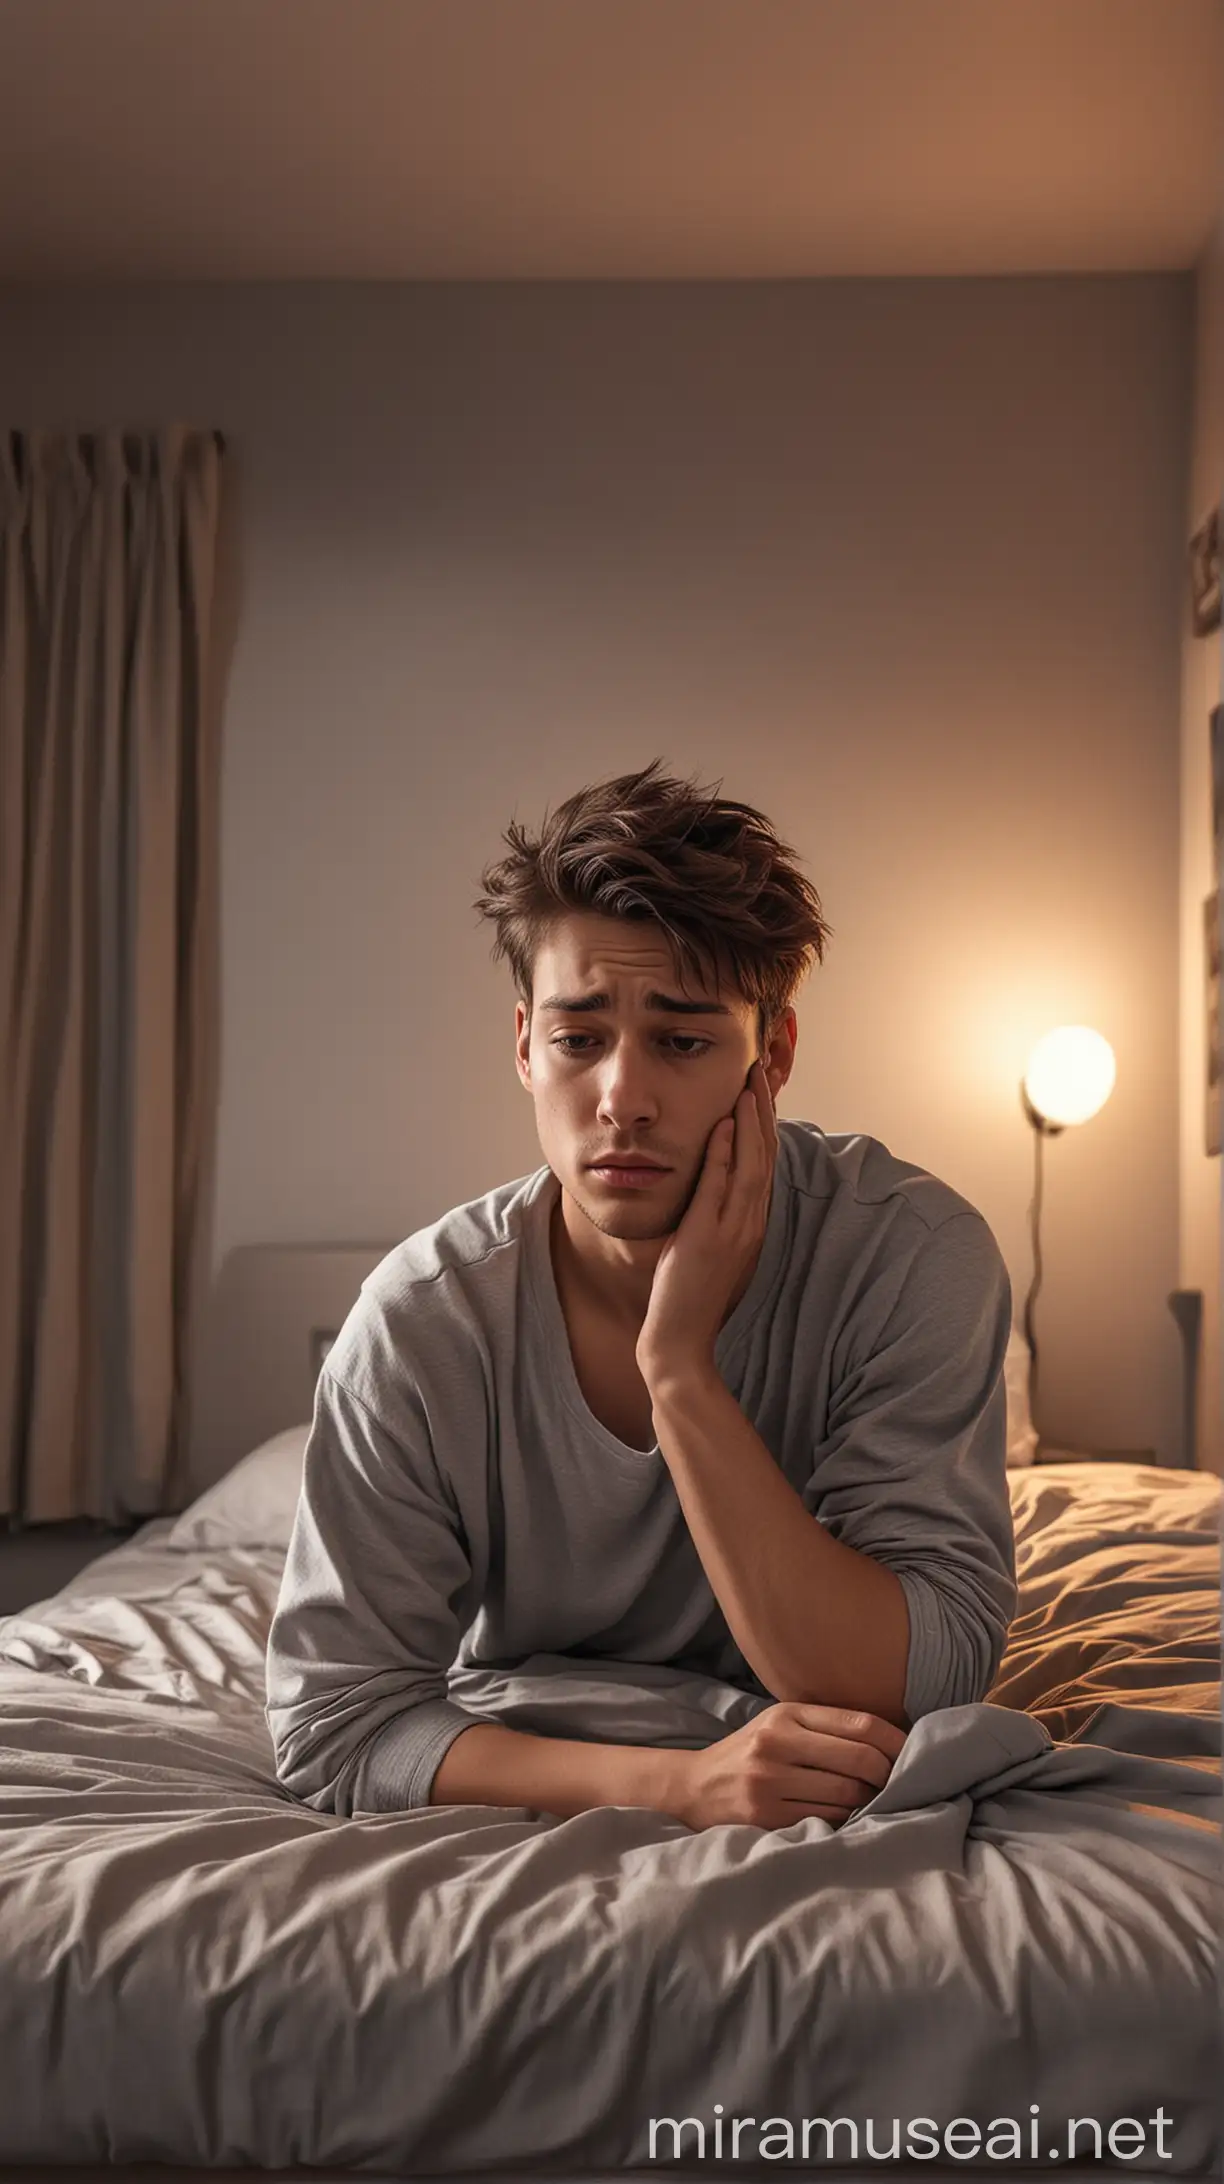 Create a 3d ultra high resolution image of a young male figure looking tired and stressed and exhausted
 in a bedroom with dynamic lighting, dynamic colors.
 Make it very detailed & realistic. Make the image in 9:16 format for TikTok vertical format media